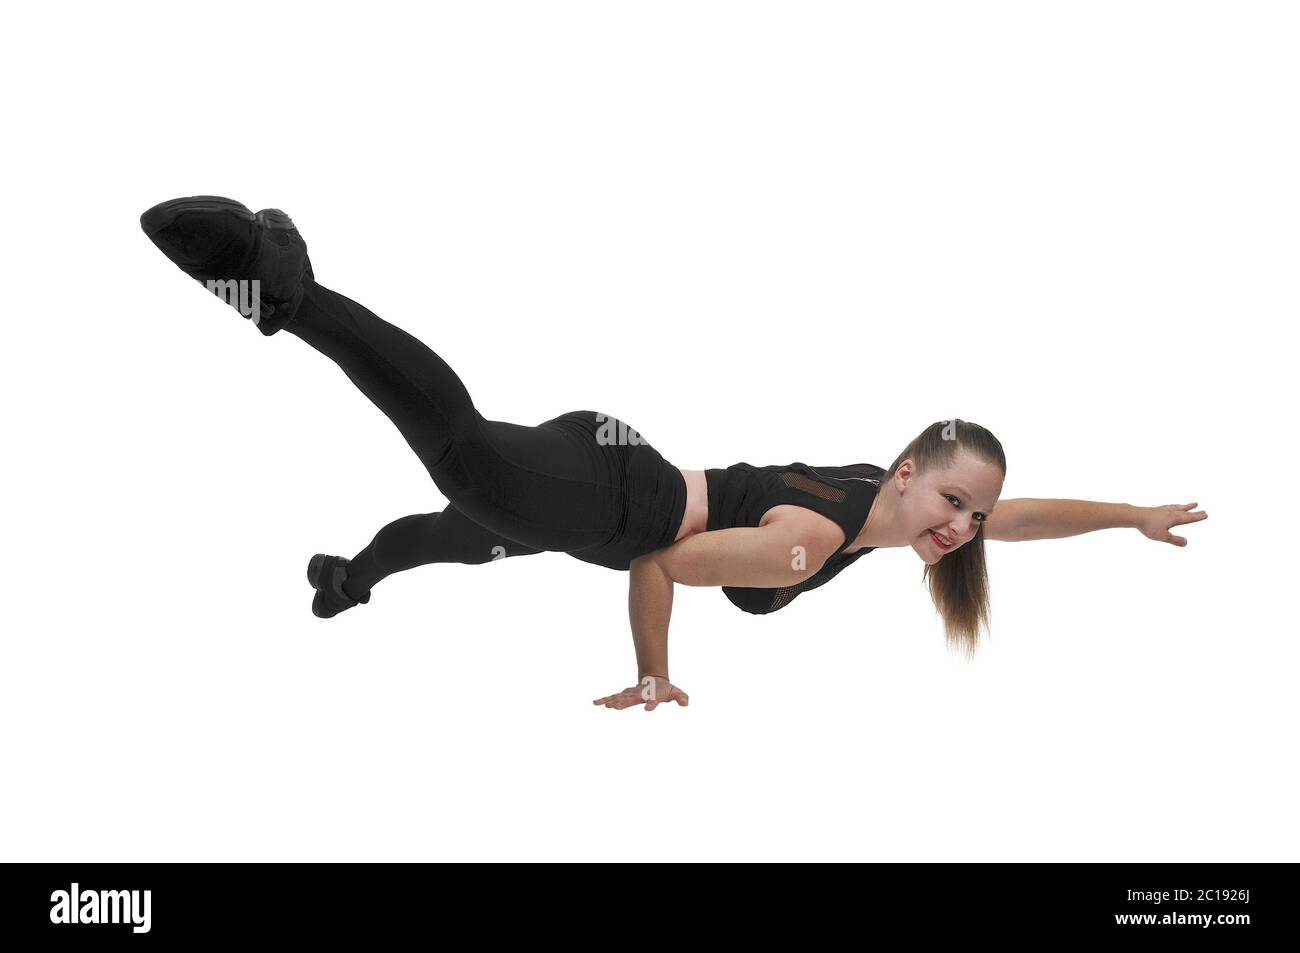 Woman Doing One Handed Pushups Stock Photo